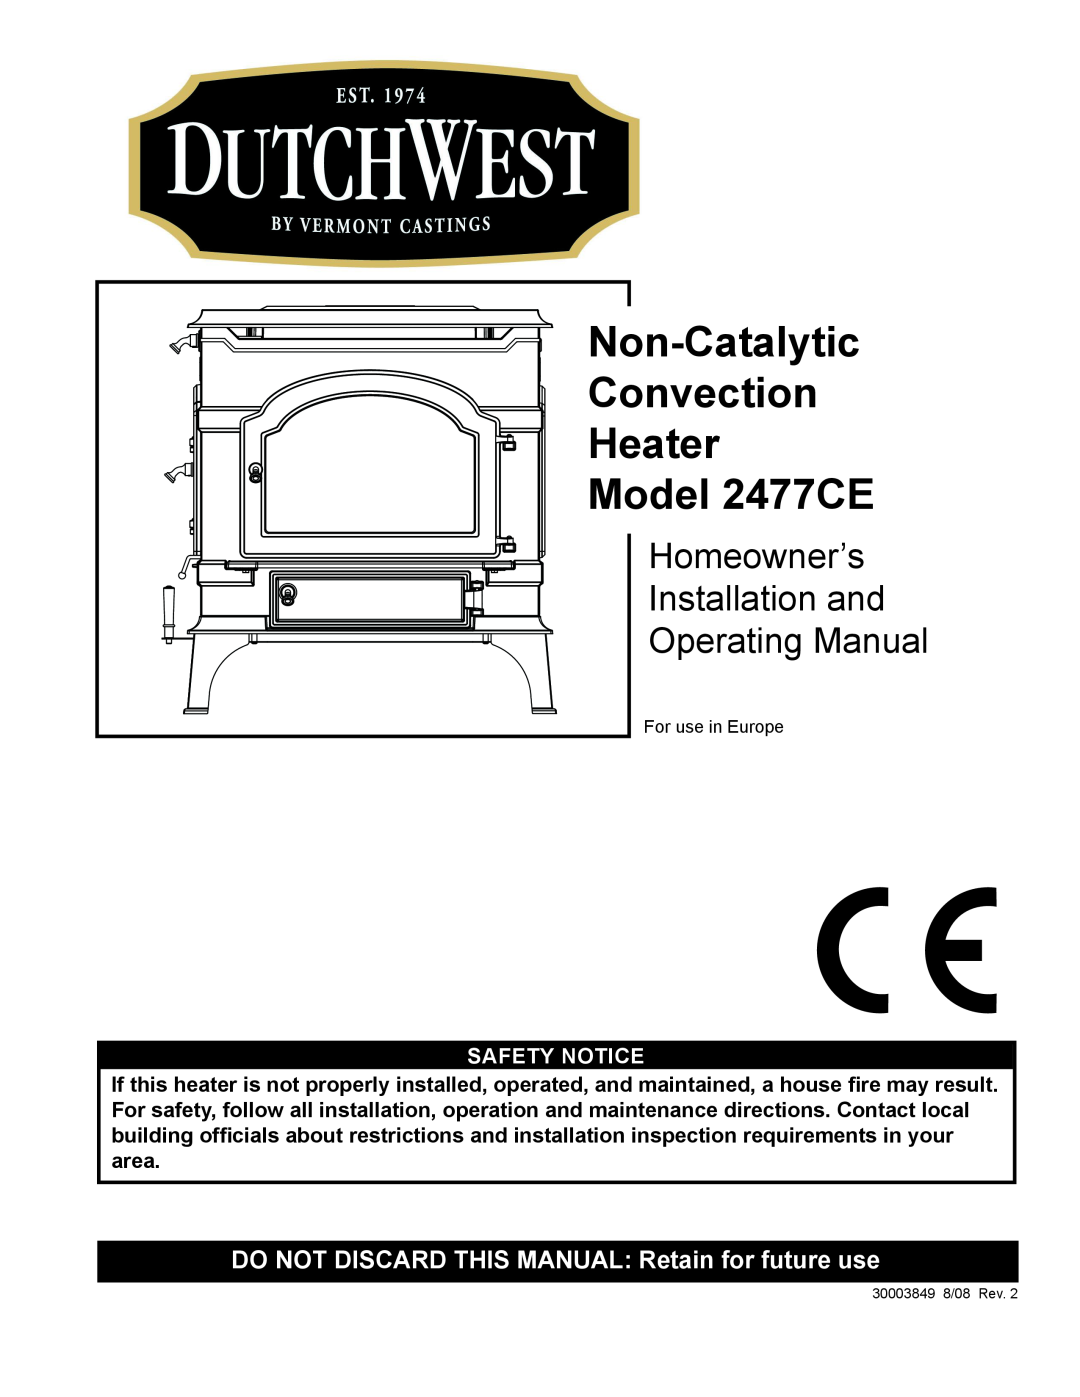 Vermont Casting manual Non-Catalytic Convection Heater Model 2477CE, Safety Notice 